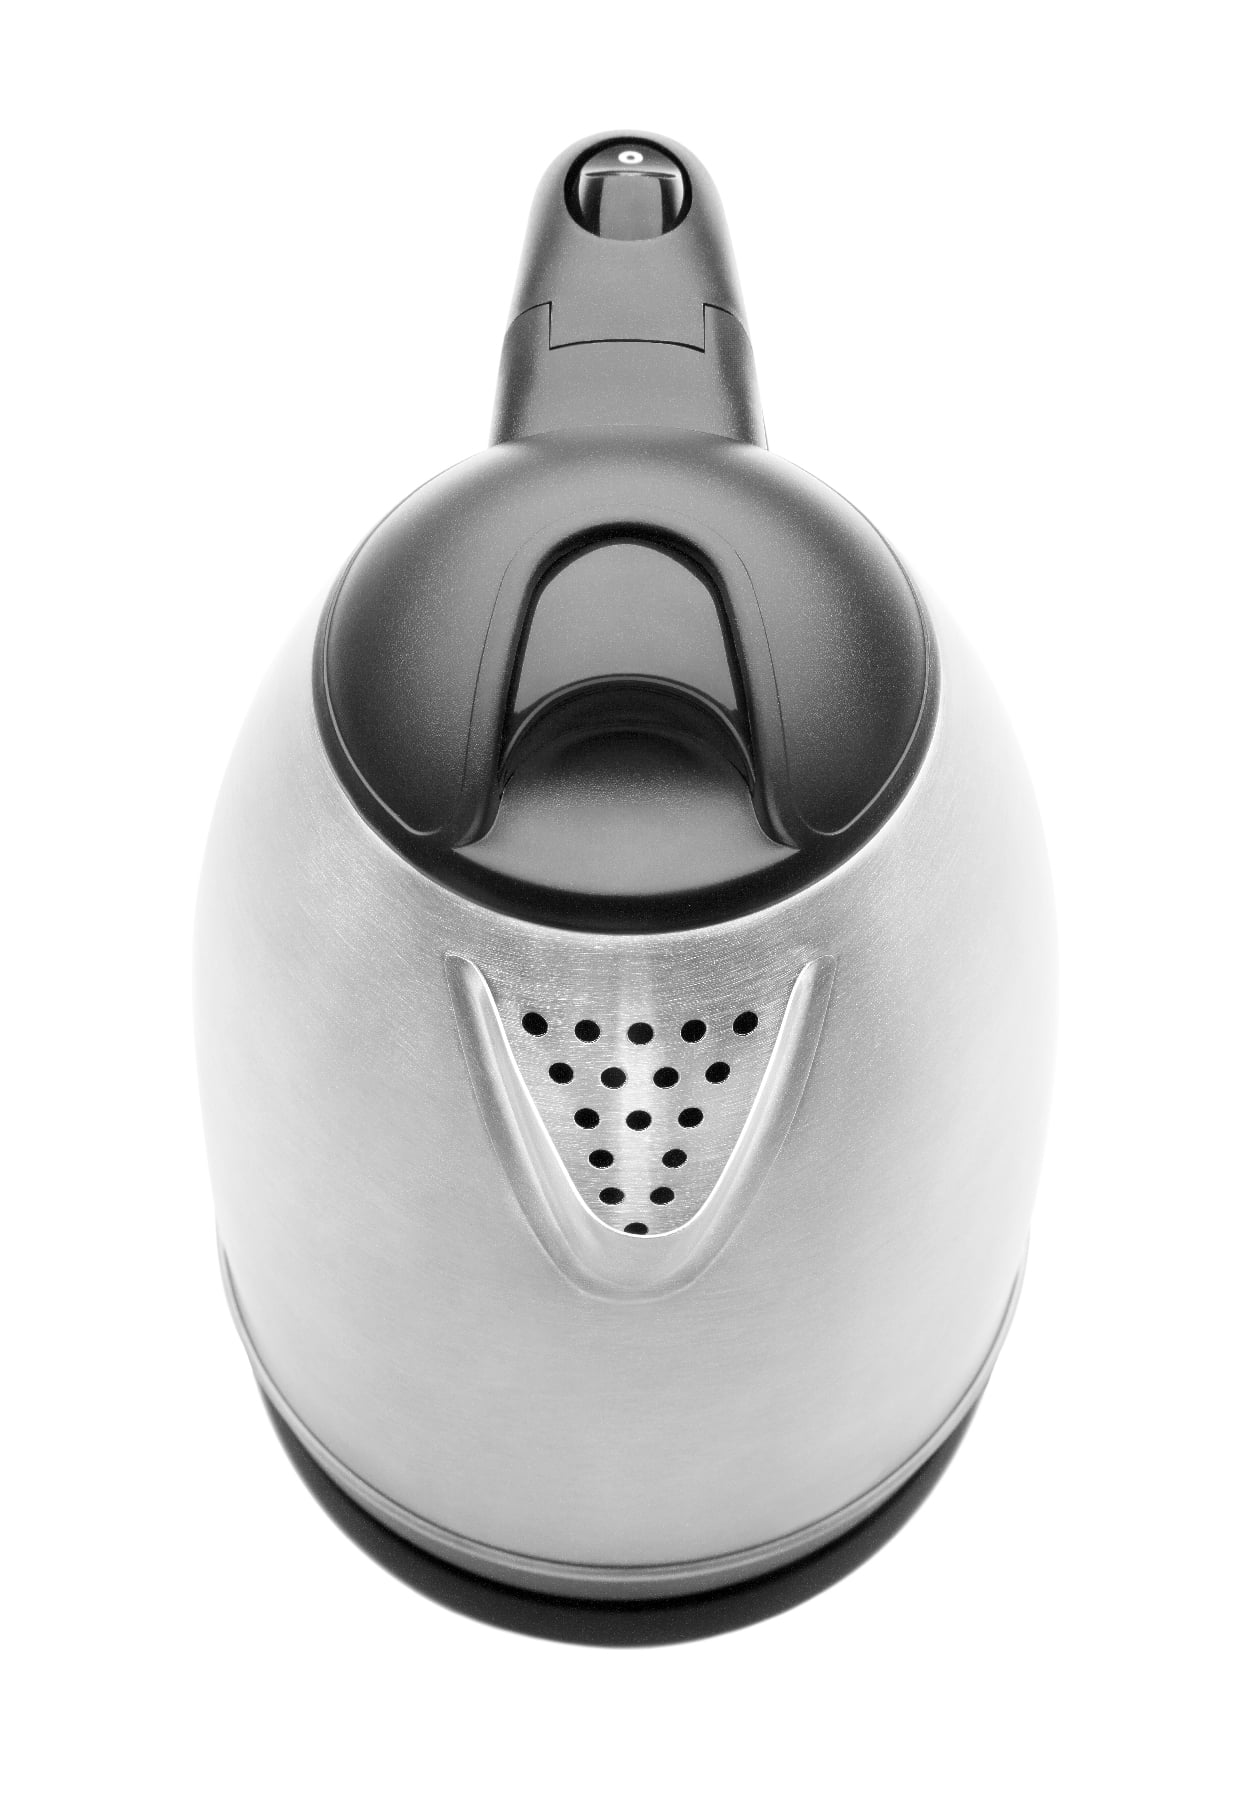 Chefman® Color Changing Stainless Steel Electric Kettle, 1.7 L